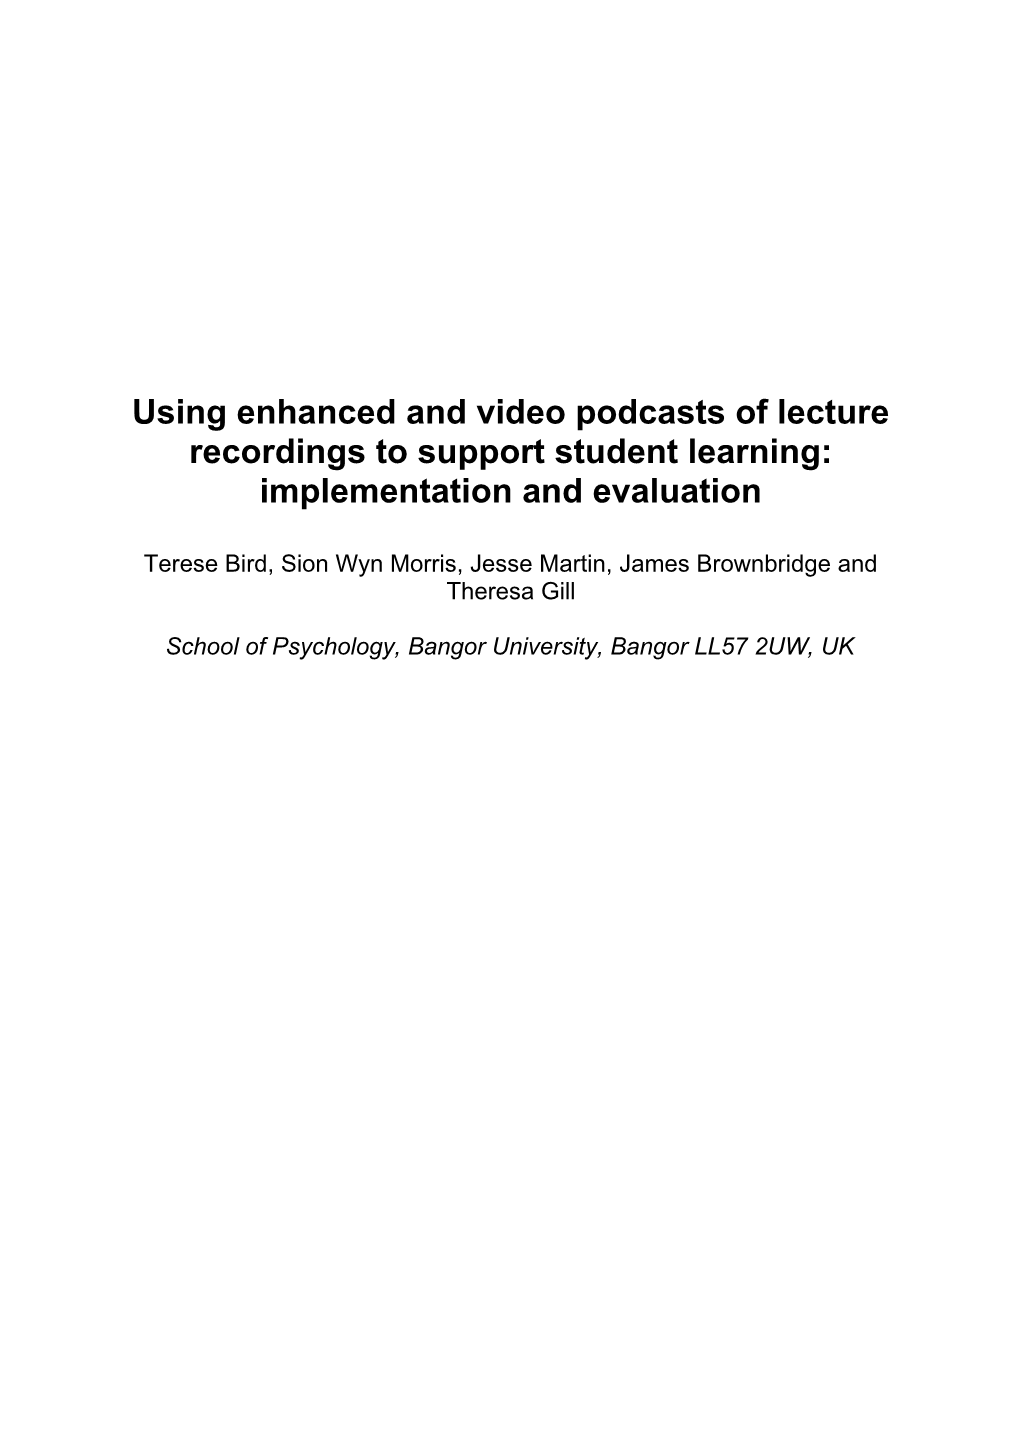 The Advent of the Podcast Has Not Marked the First Recording of University Lectures